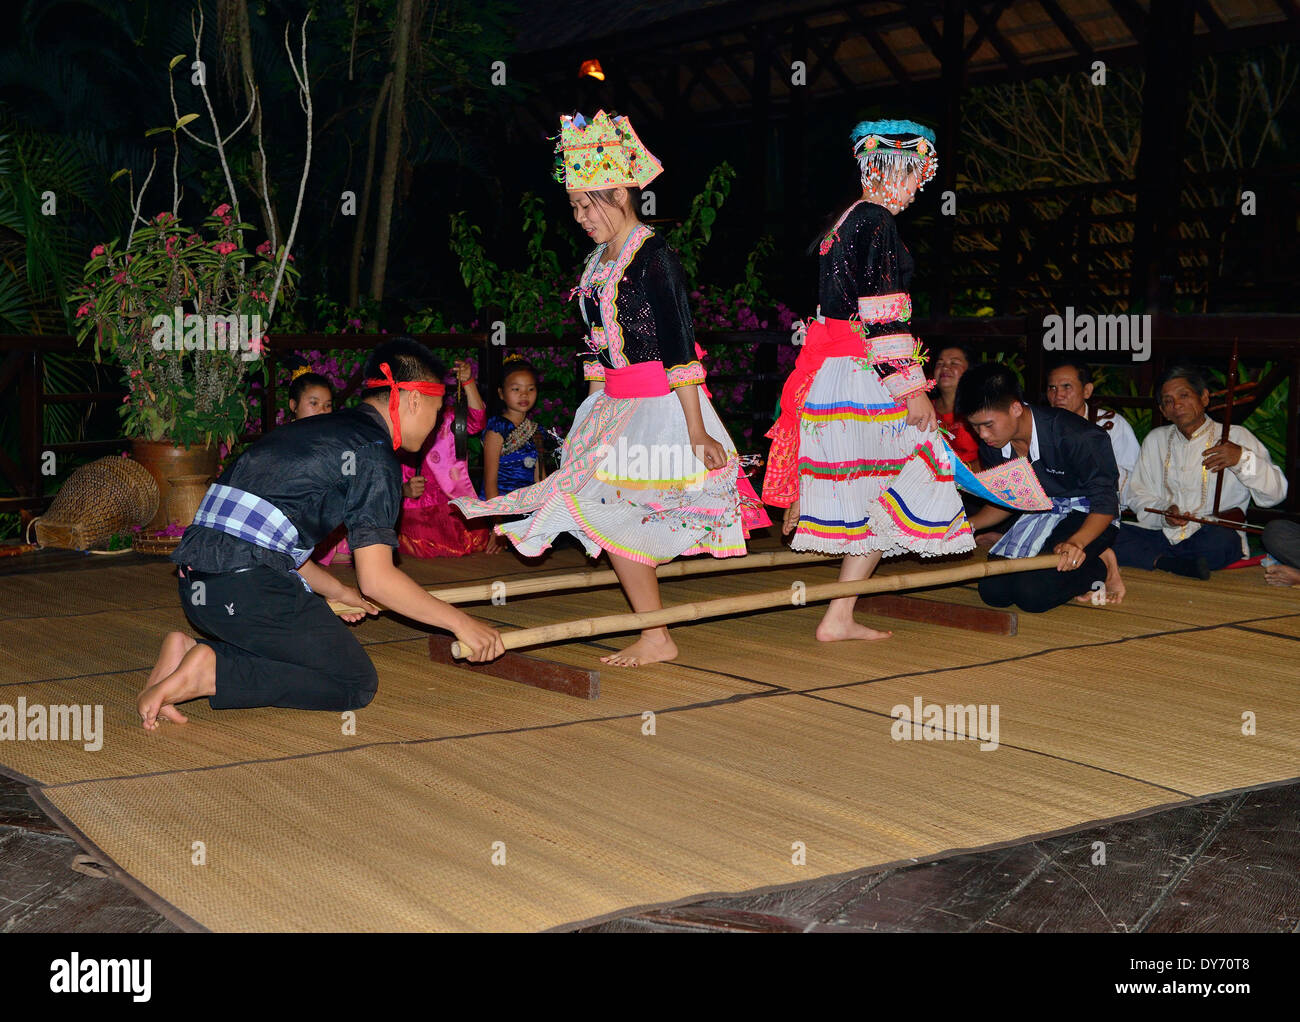 Hmong men and women perform traditional dancing at night to entertain tourists, Laos, Southeast Asia Stock Photo